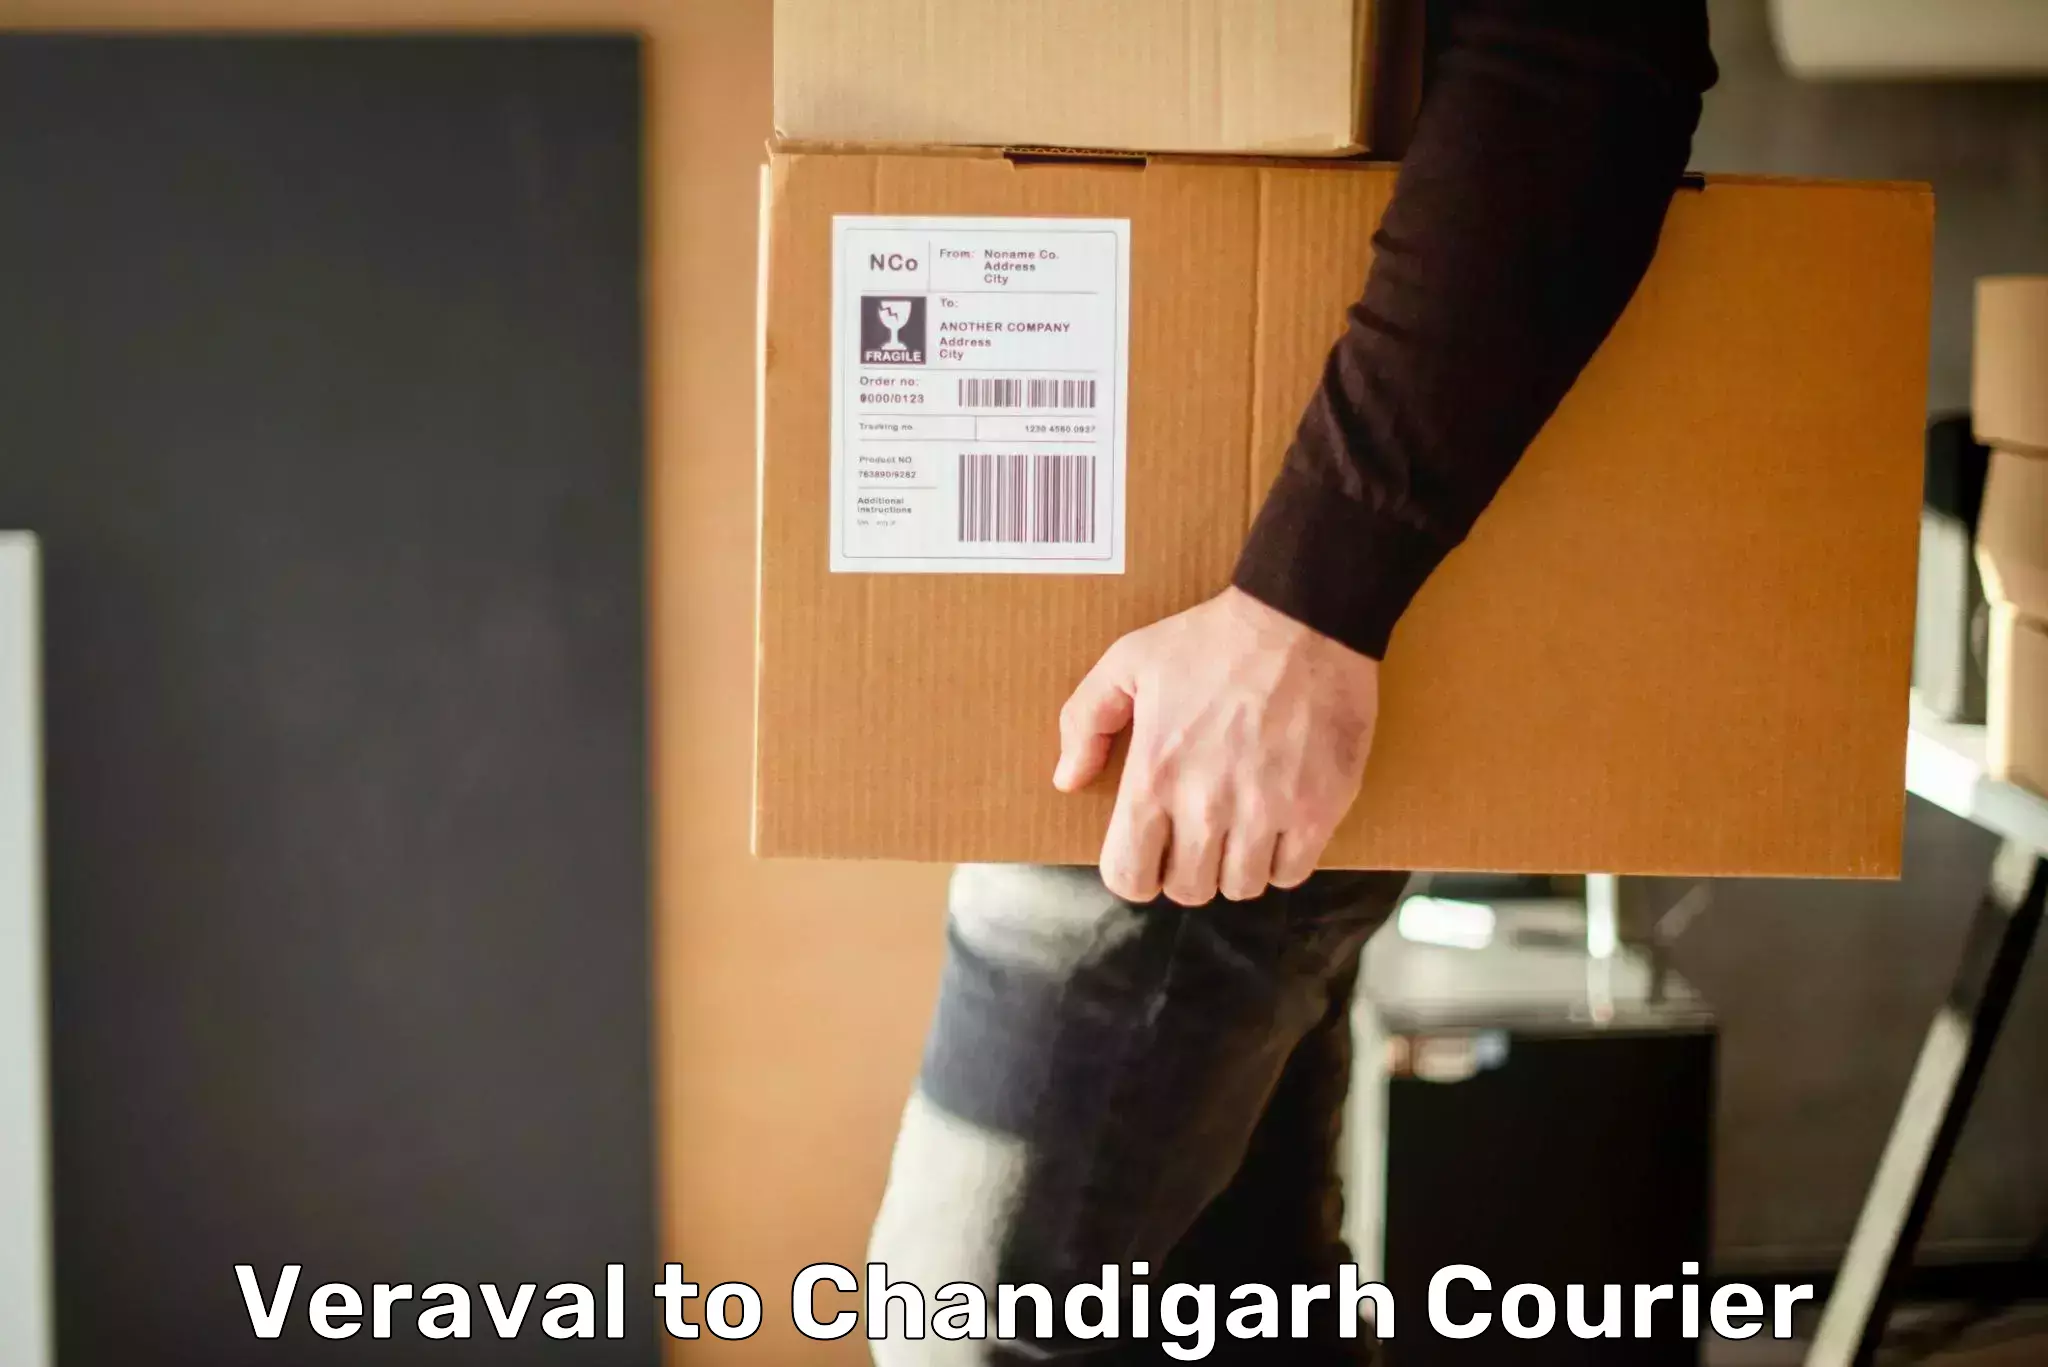 Professional courier handling Veraval to Chandigarh